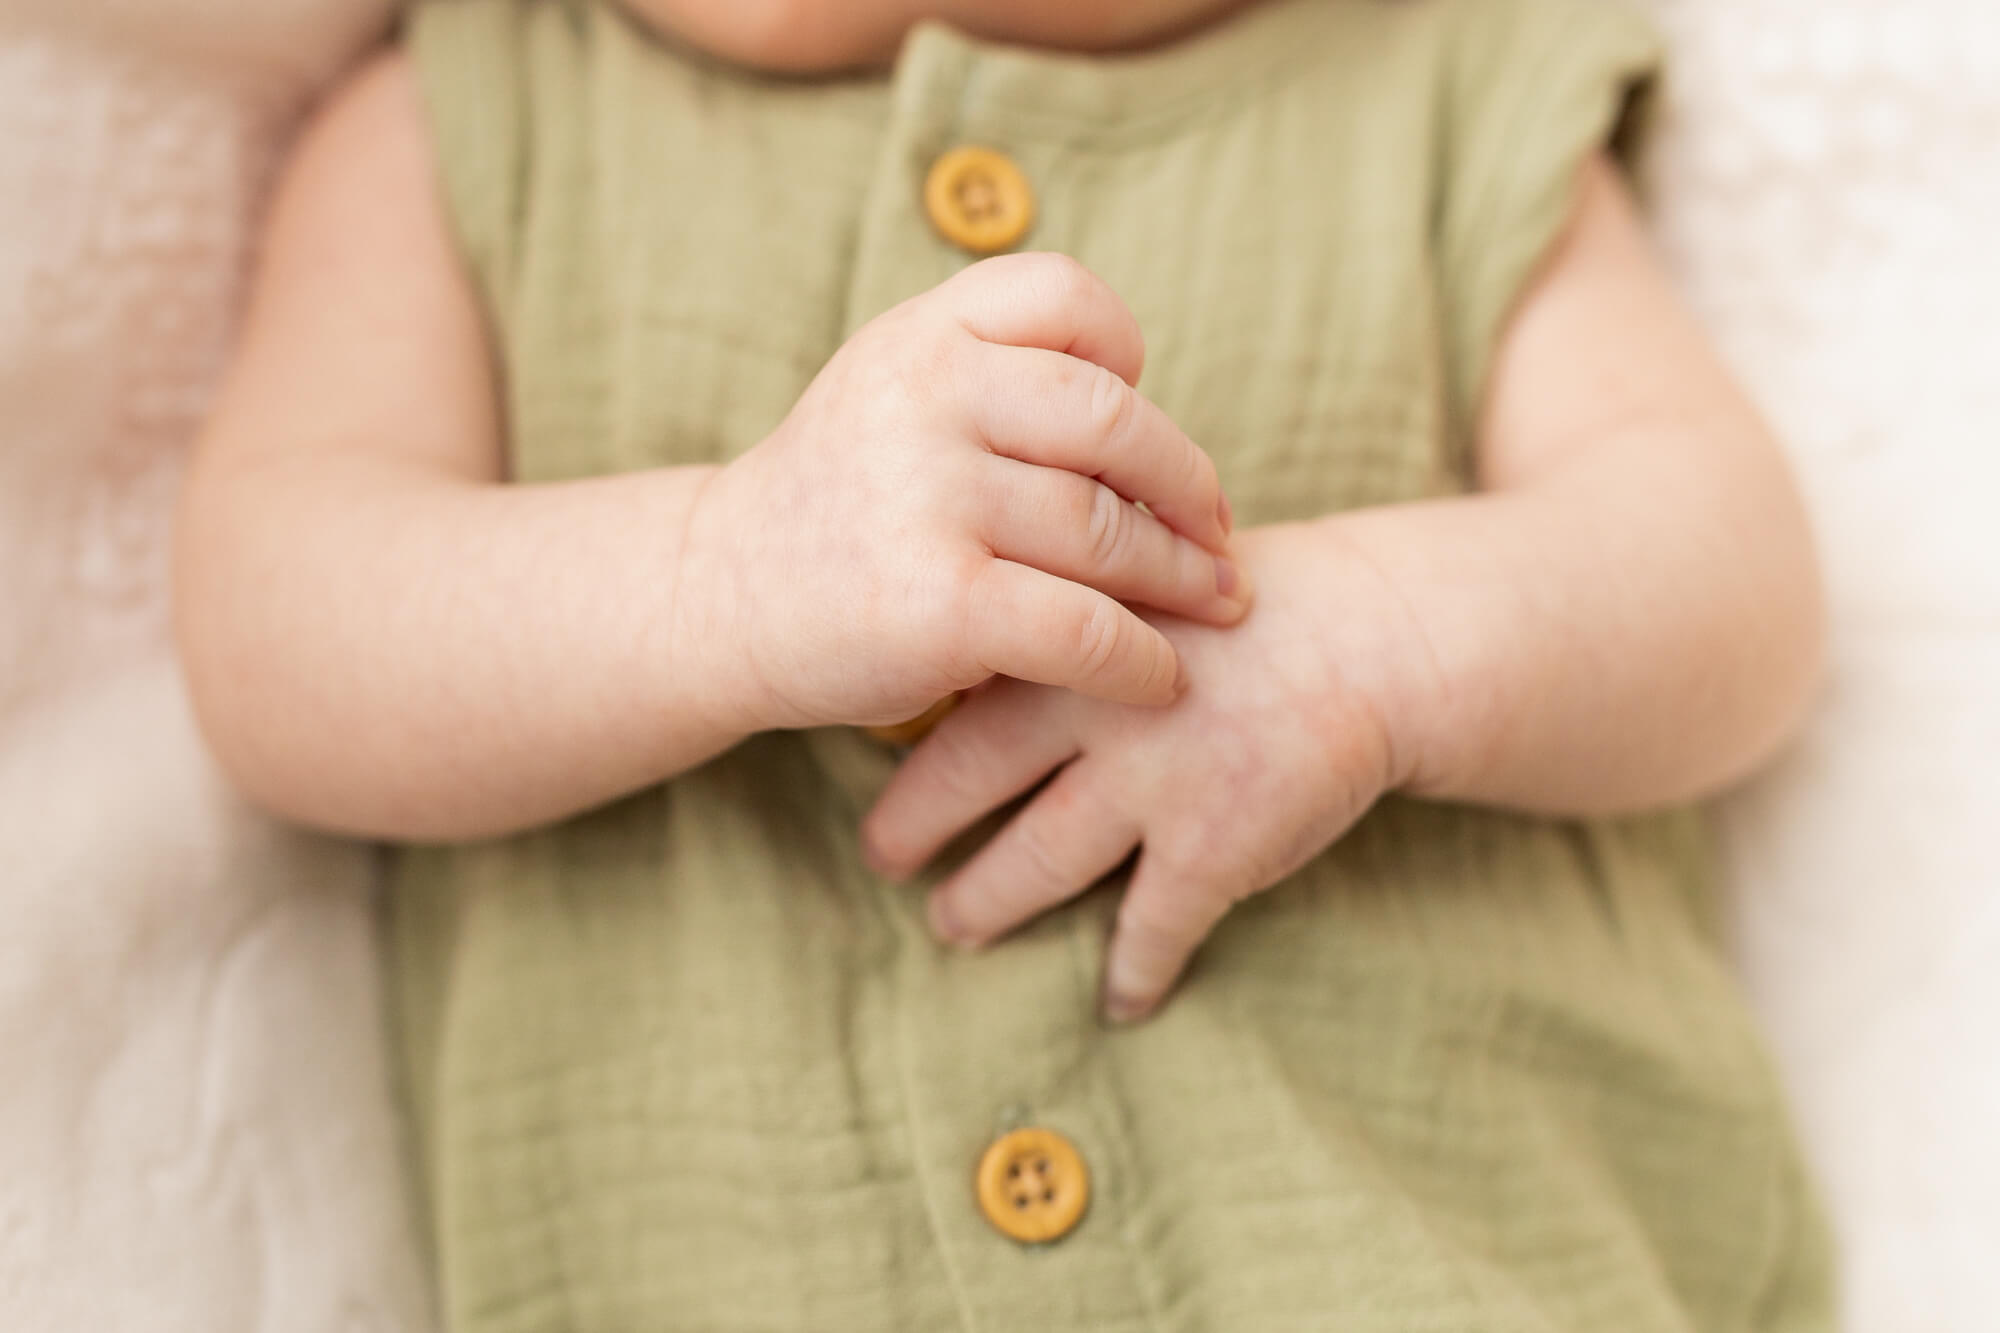 close up details of a young baby's hands on their onesie